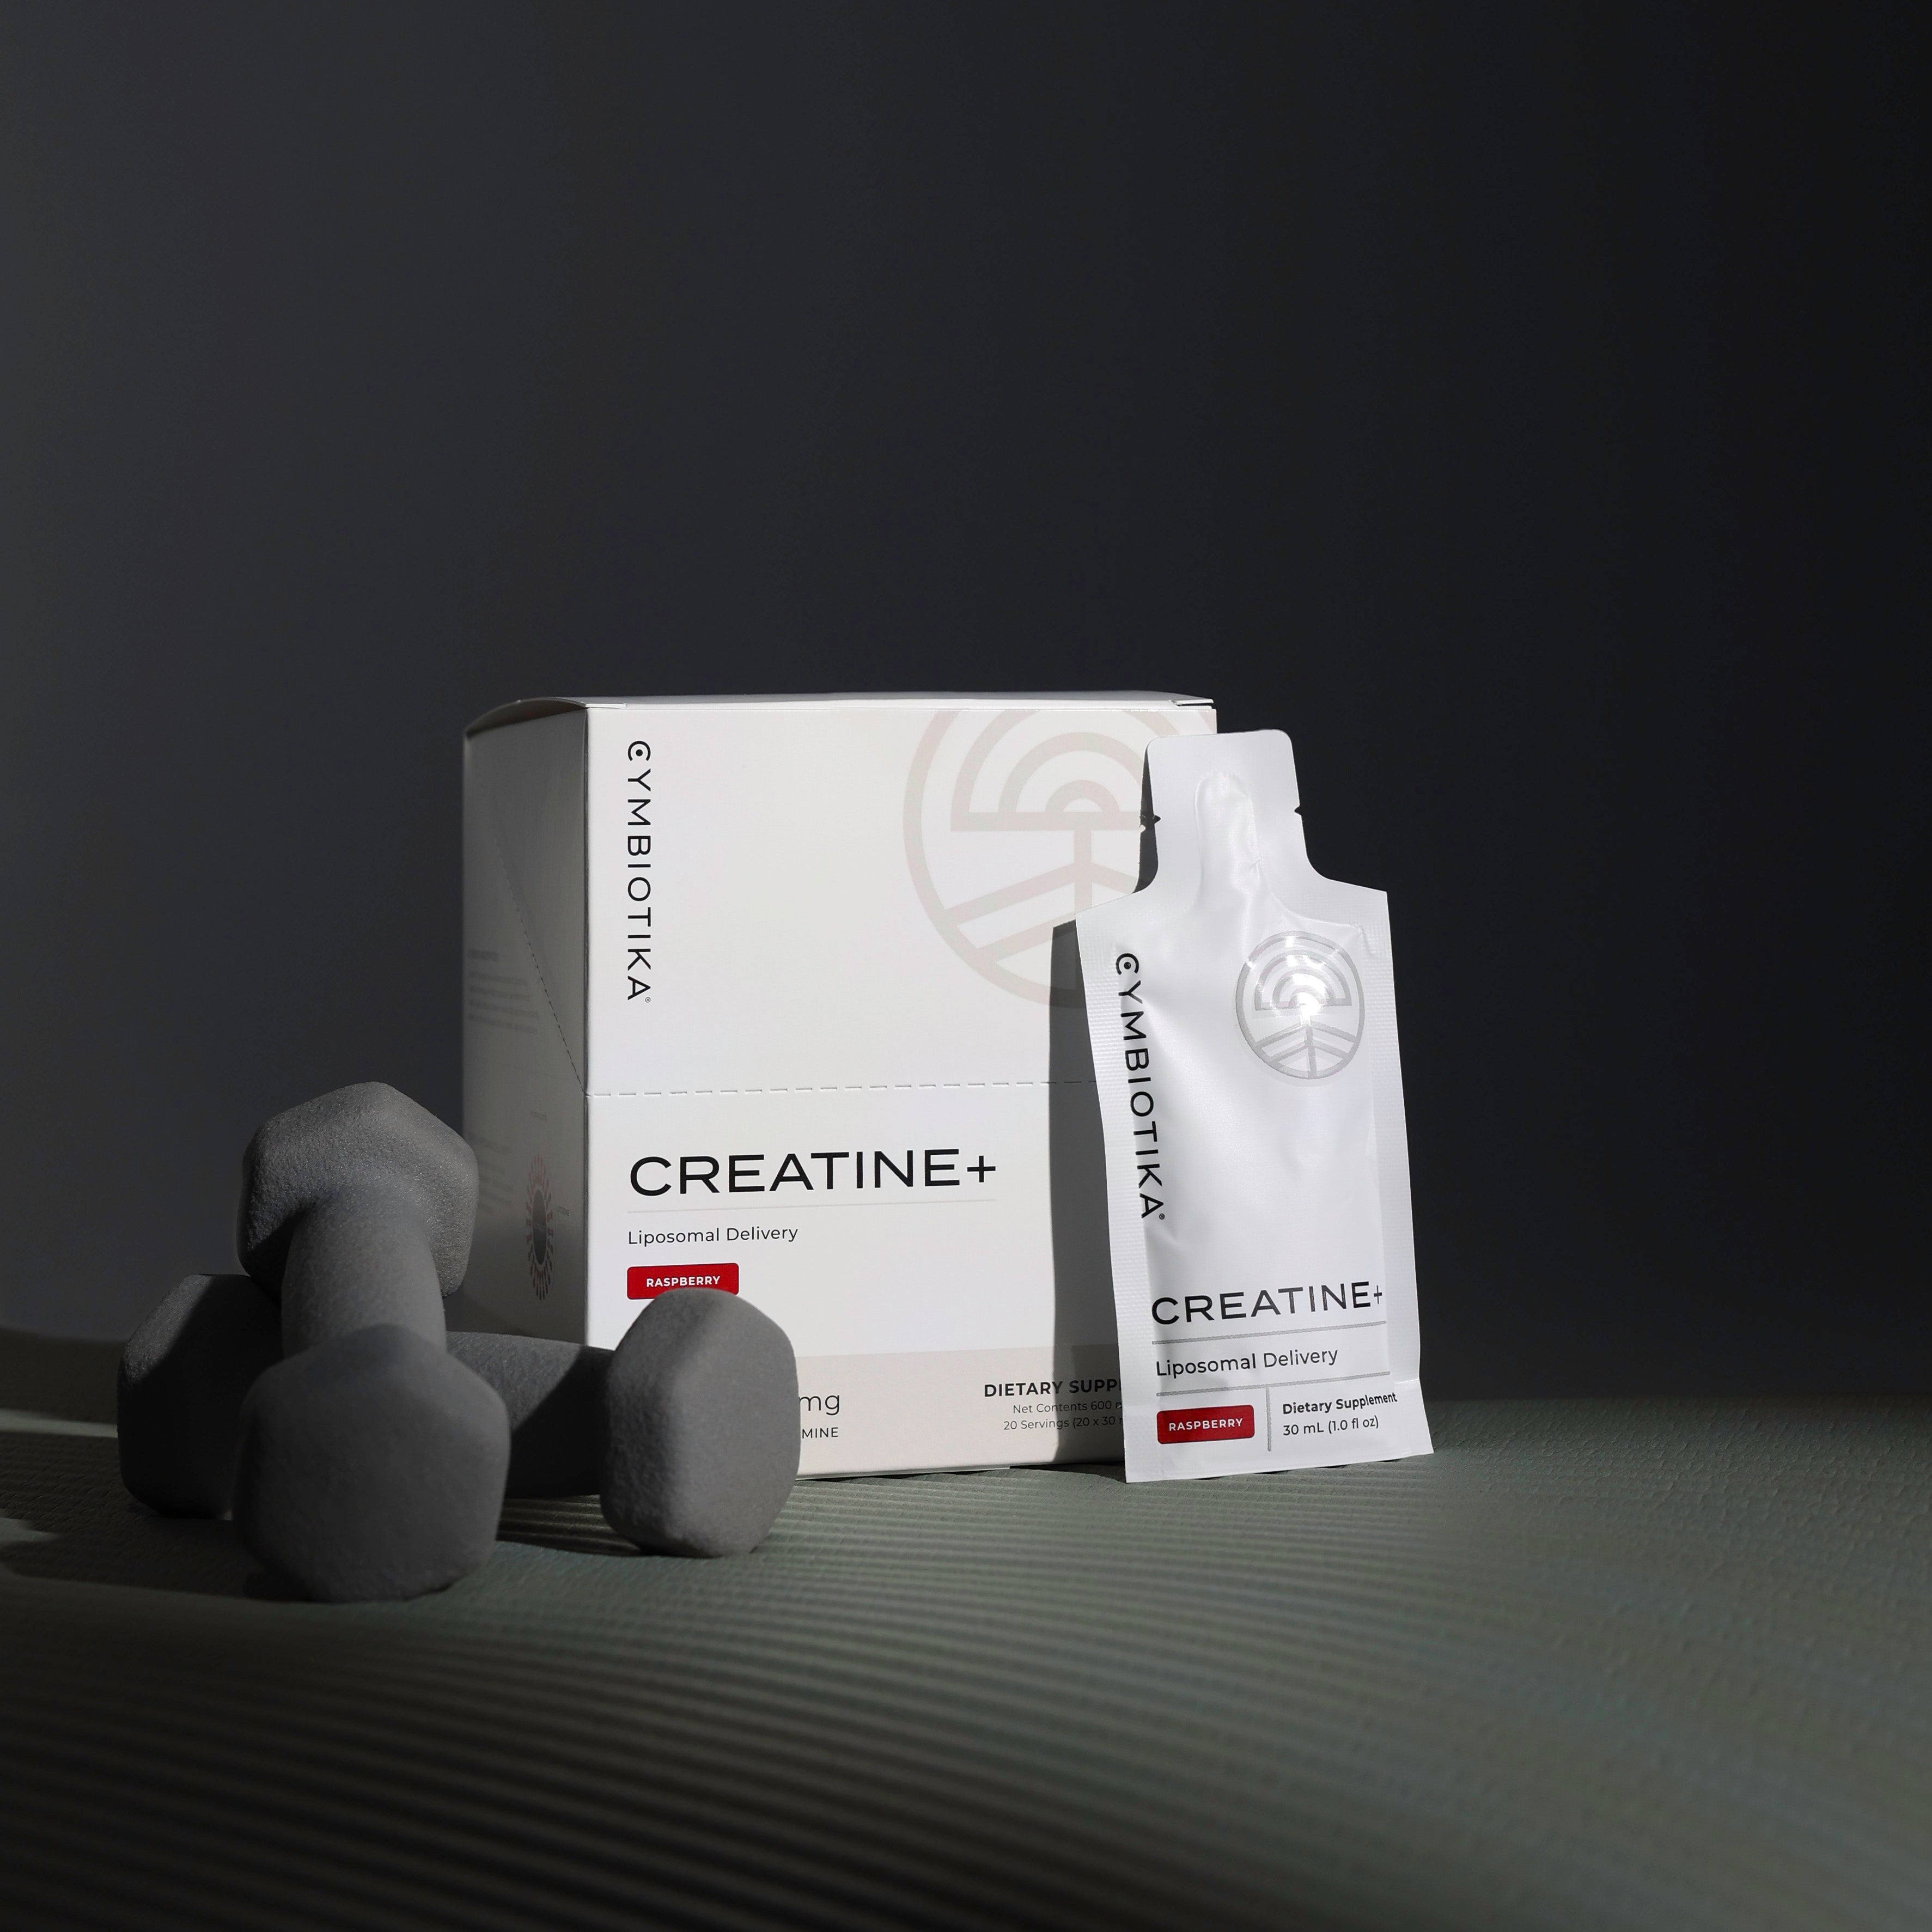 Creatine+ Box with Creatine+ pouch next to exercise weights